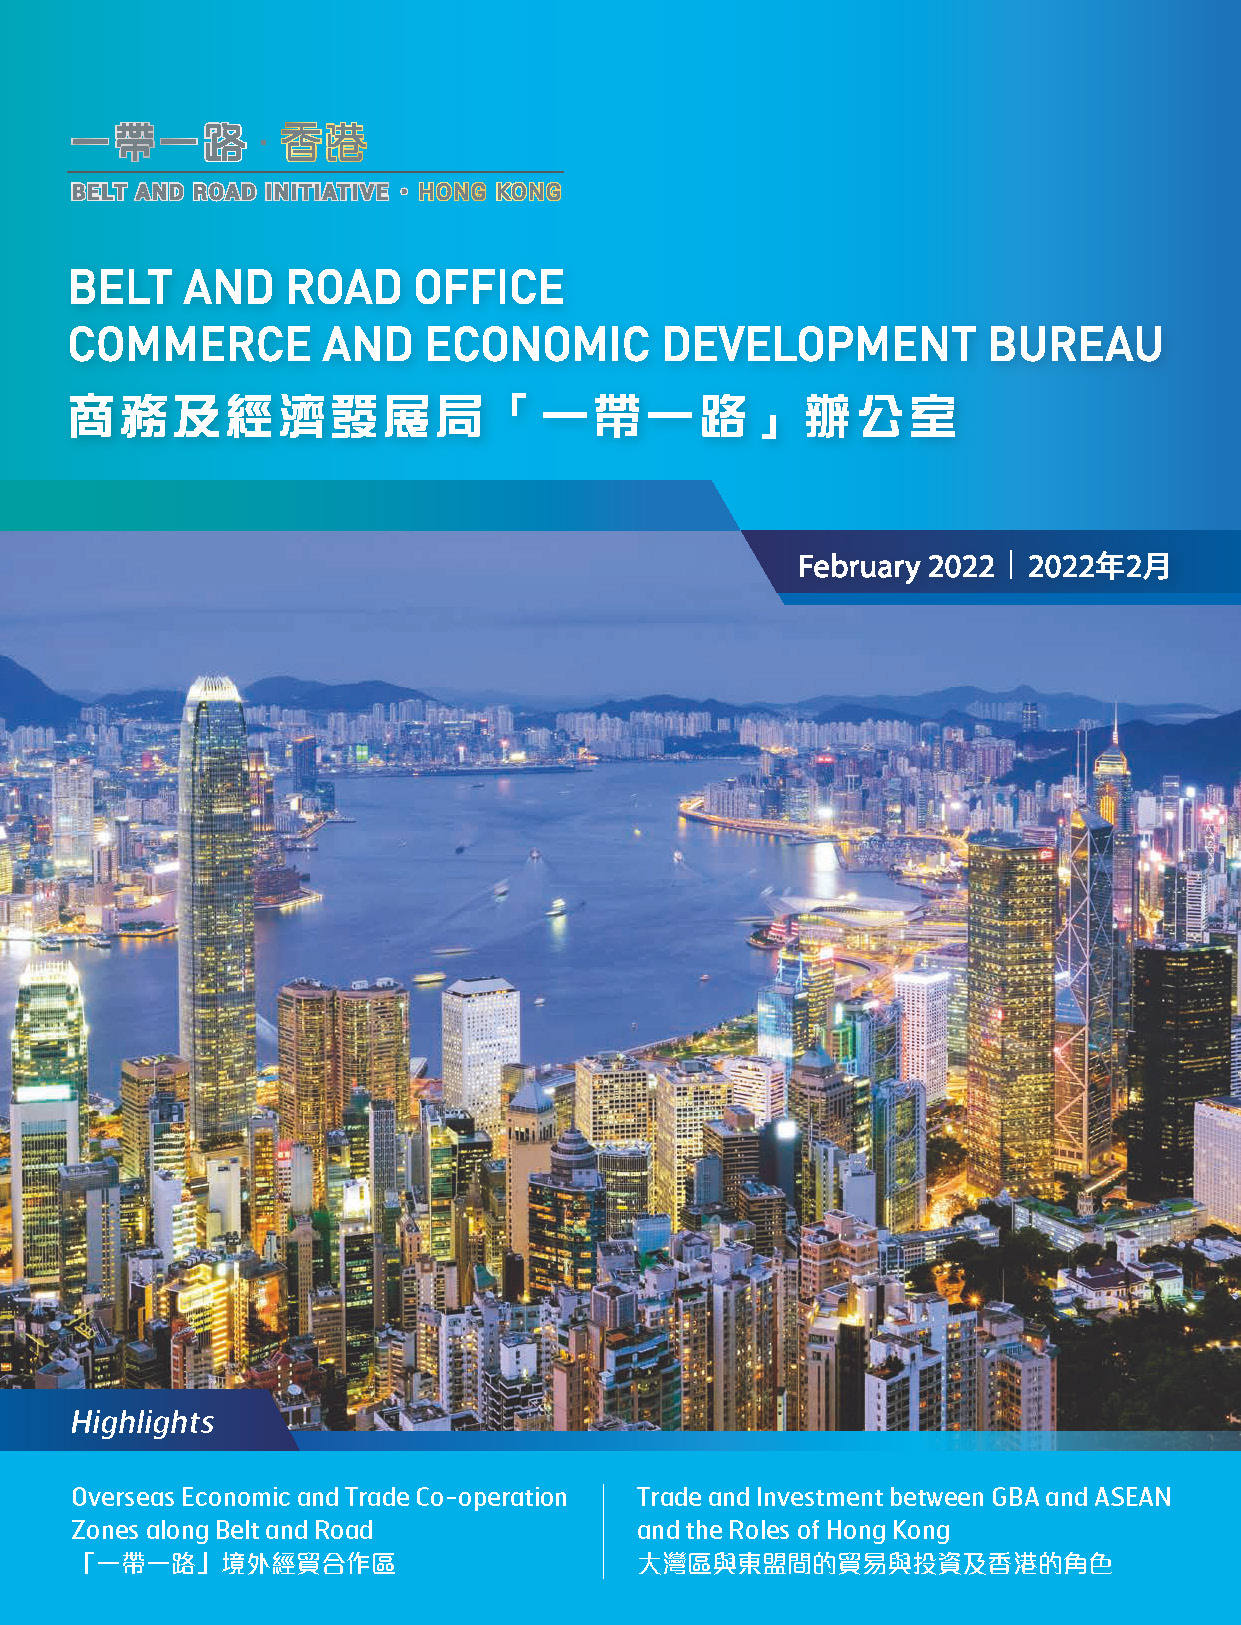 Belt and Road Office Newsletter – 4th Edition (February 2022)